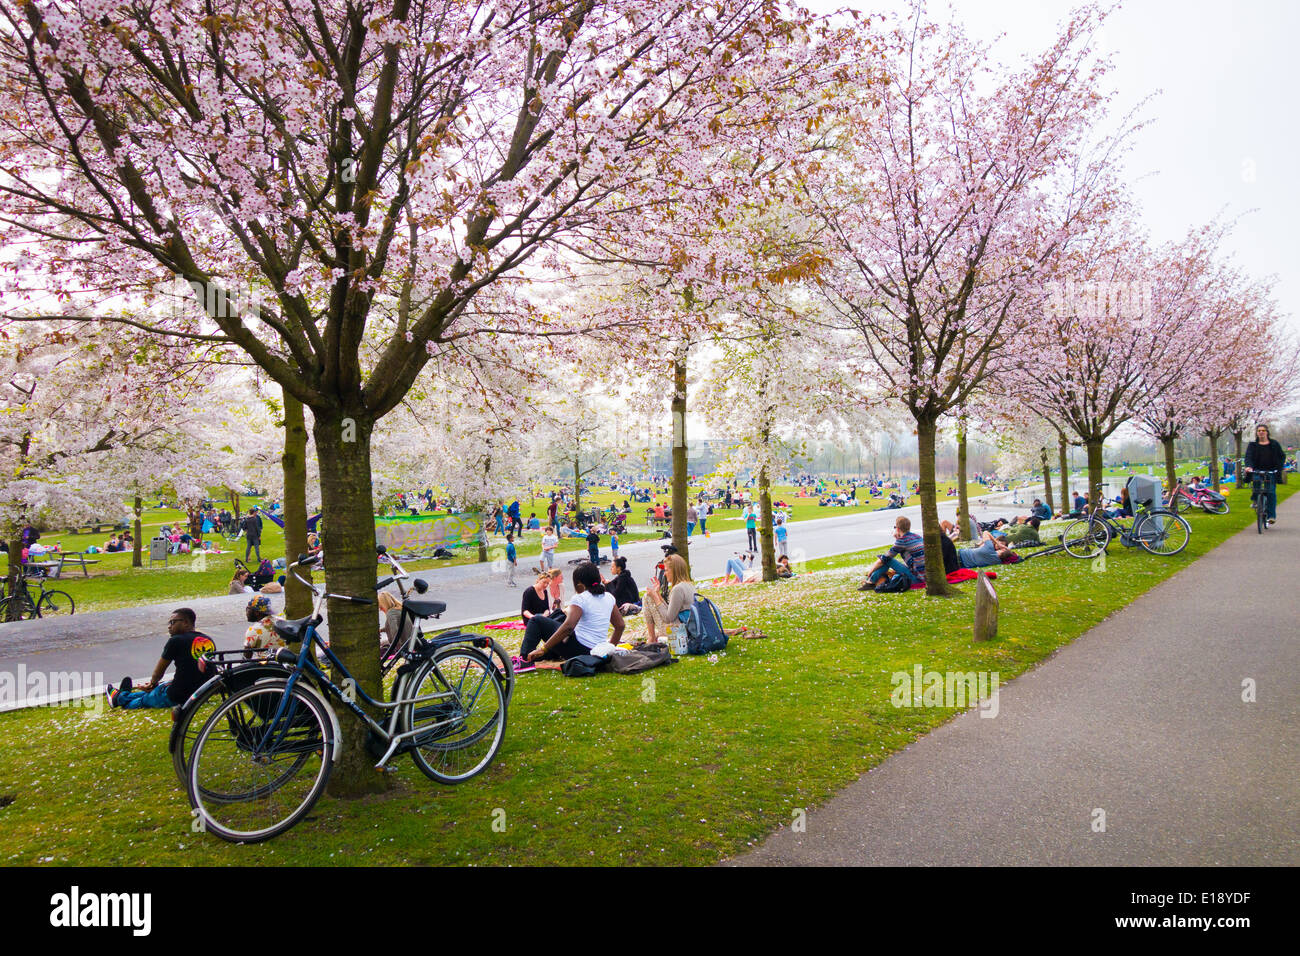 Cherry blossom Trees in bloom in Westerpark Amsterdam Stock Photo